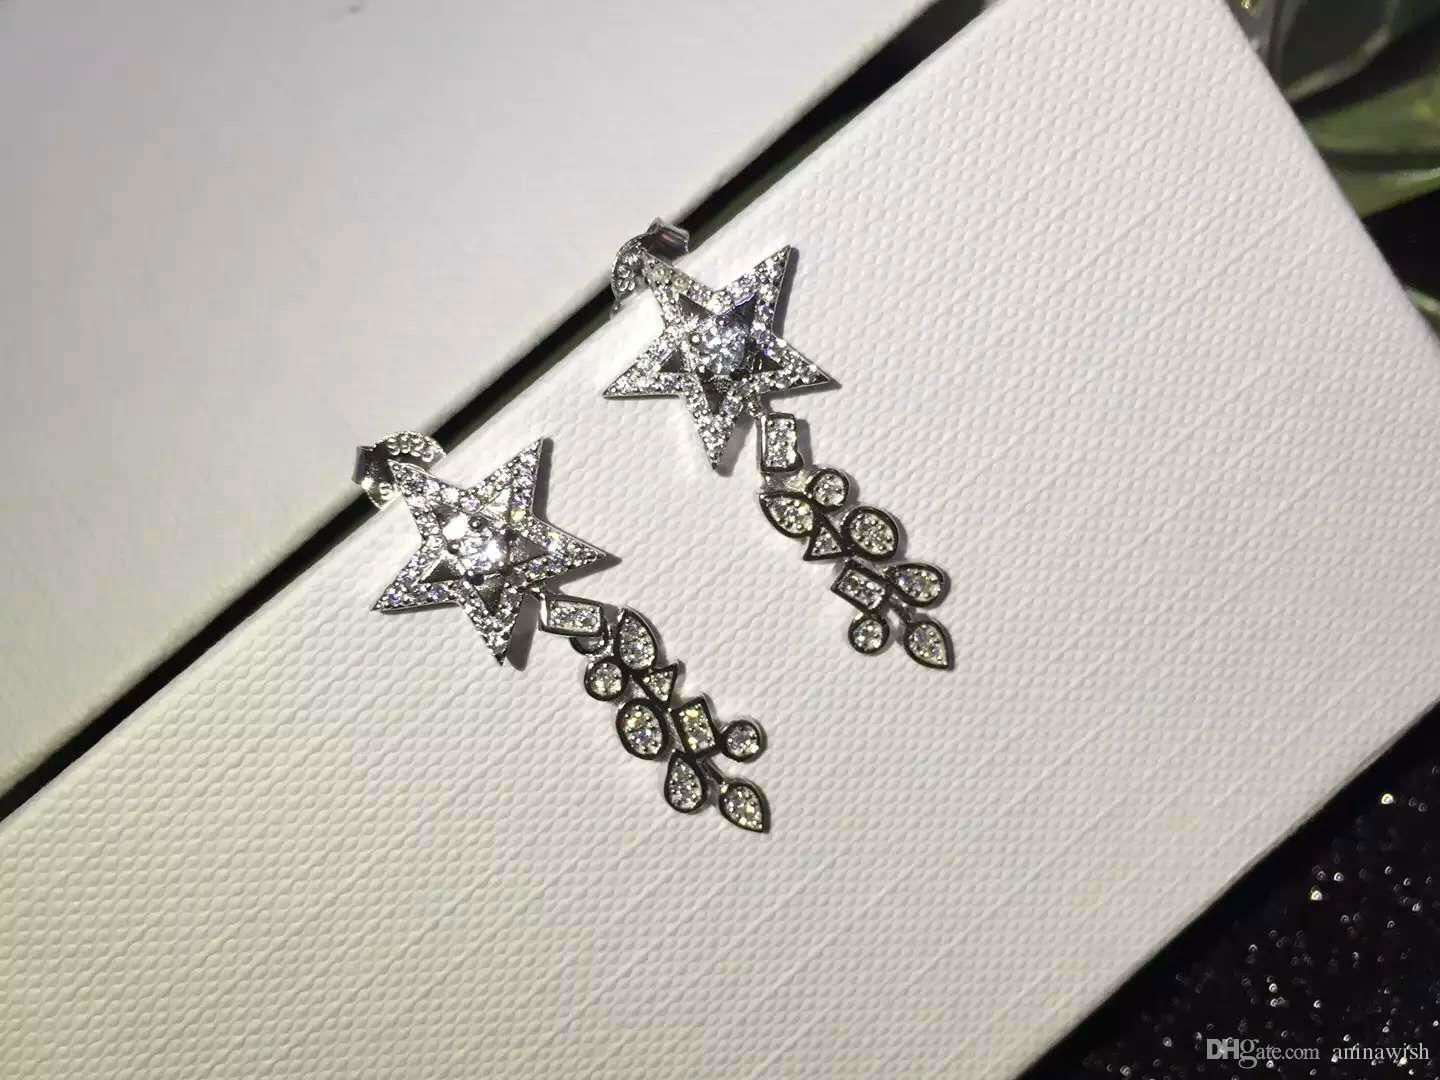 NEFFLY Hot Selling High Quality 925 Silver Earrings Fashion Jewelry Stars Beauti